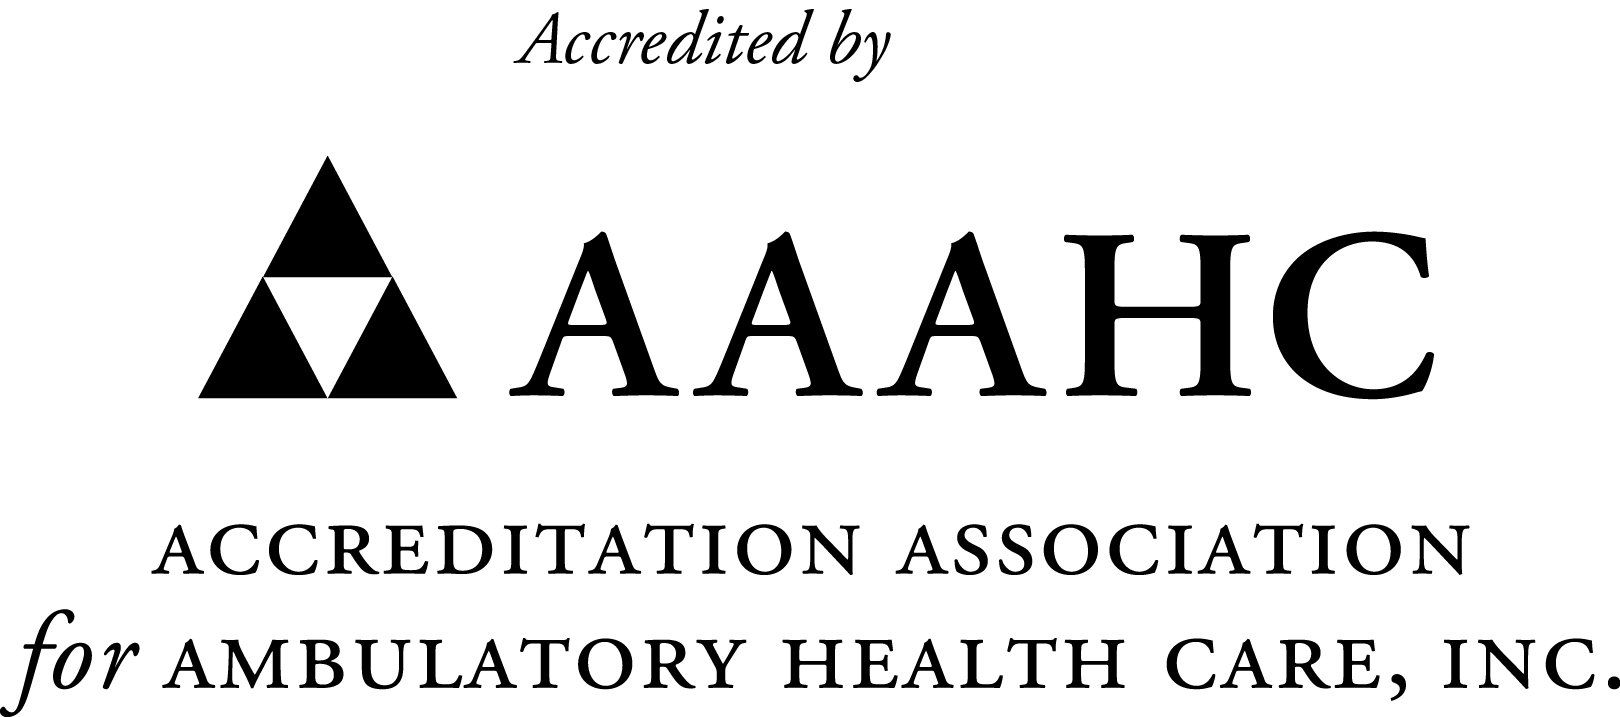 Accredited by AAAHC Logo